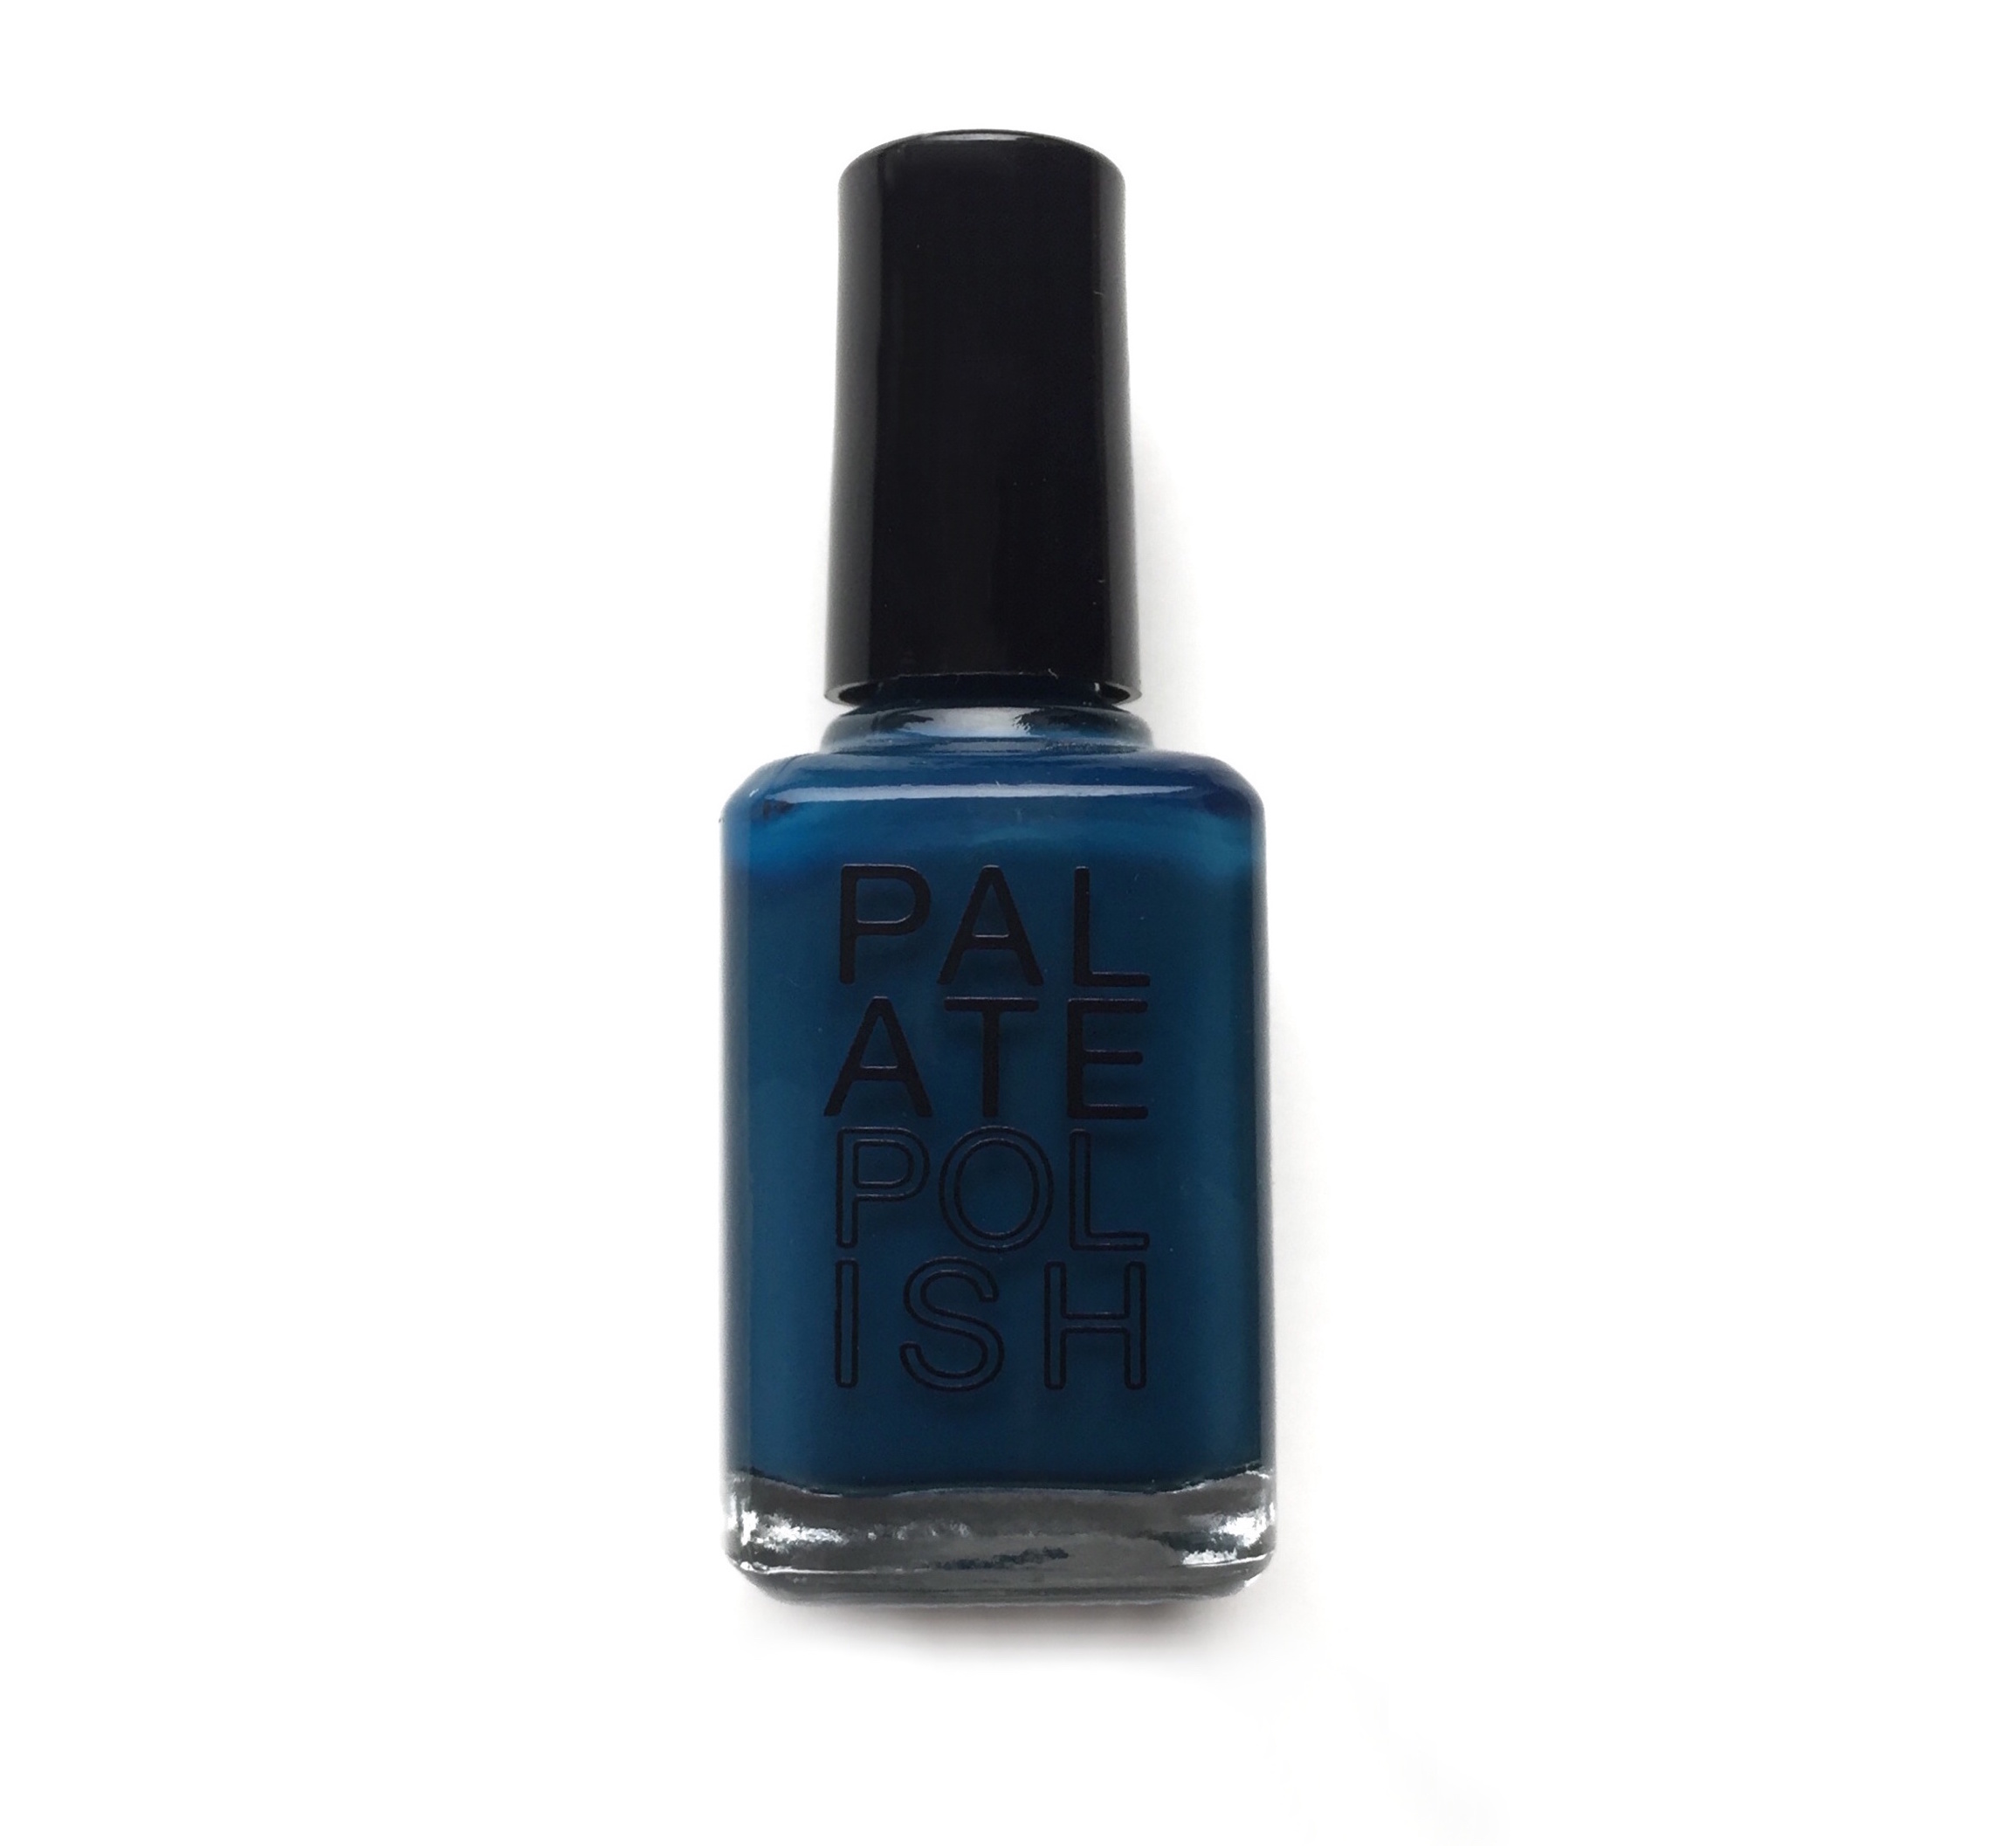 Buy DeBelle Gel Blue Nail Polish-Navy Blue(Bleu Allure), 8 ml - Enriched  with natural Seaweed Extract, cruelty Free, Toxic Free Online at Low Prices  in India - Amazon.in